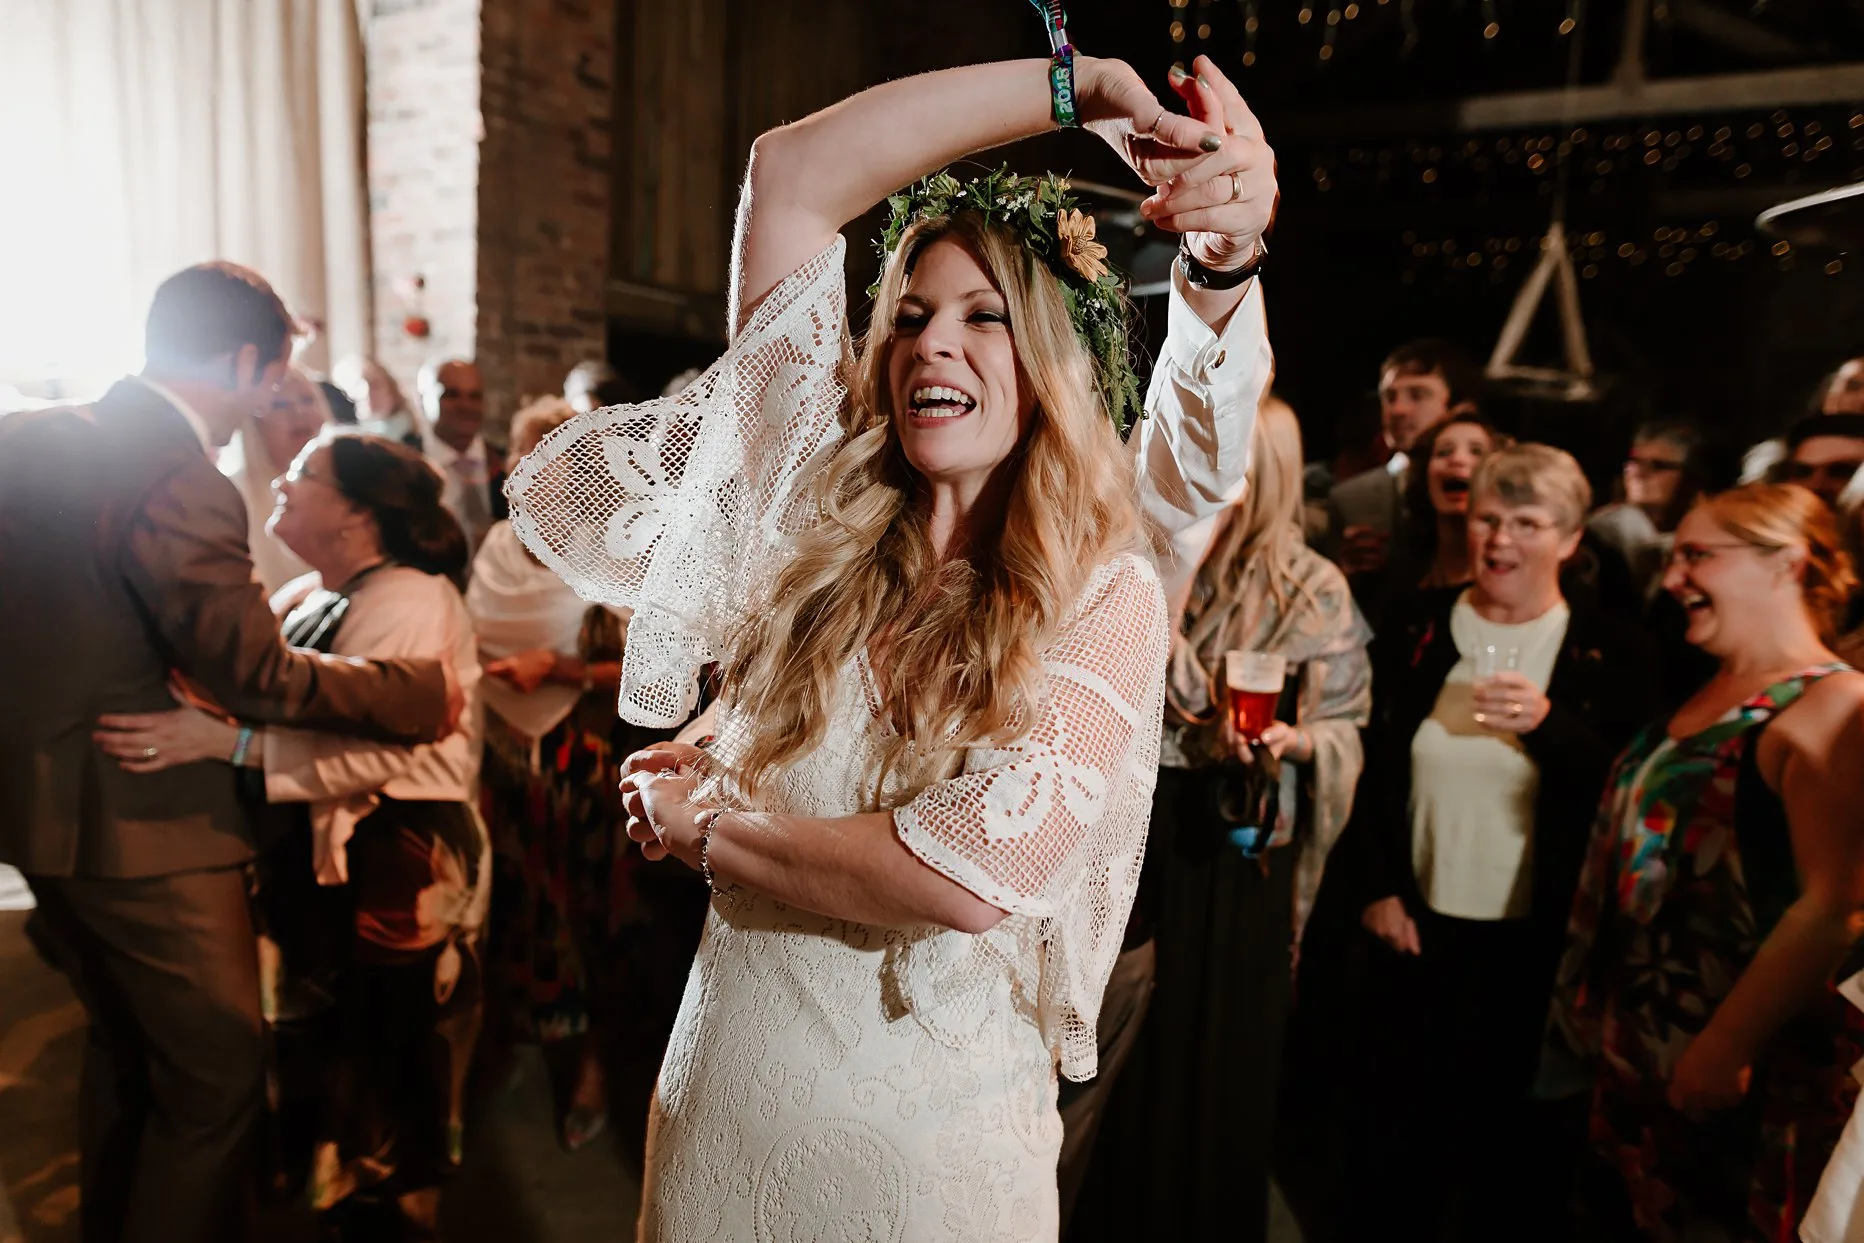 Bride being spun around by a wedding guest. The bride looks happy and is smiling. She is wearing a white crochet wedding dress and foliage flower crown.